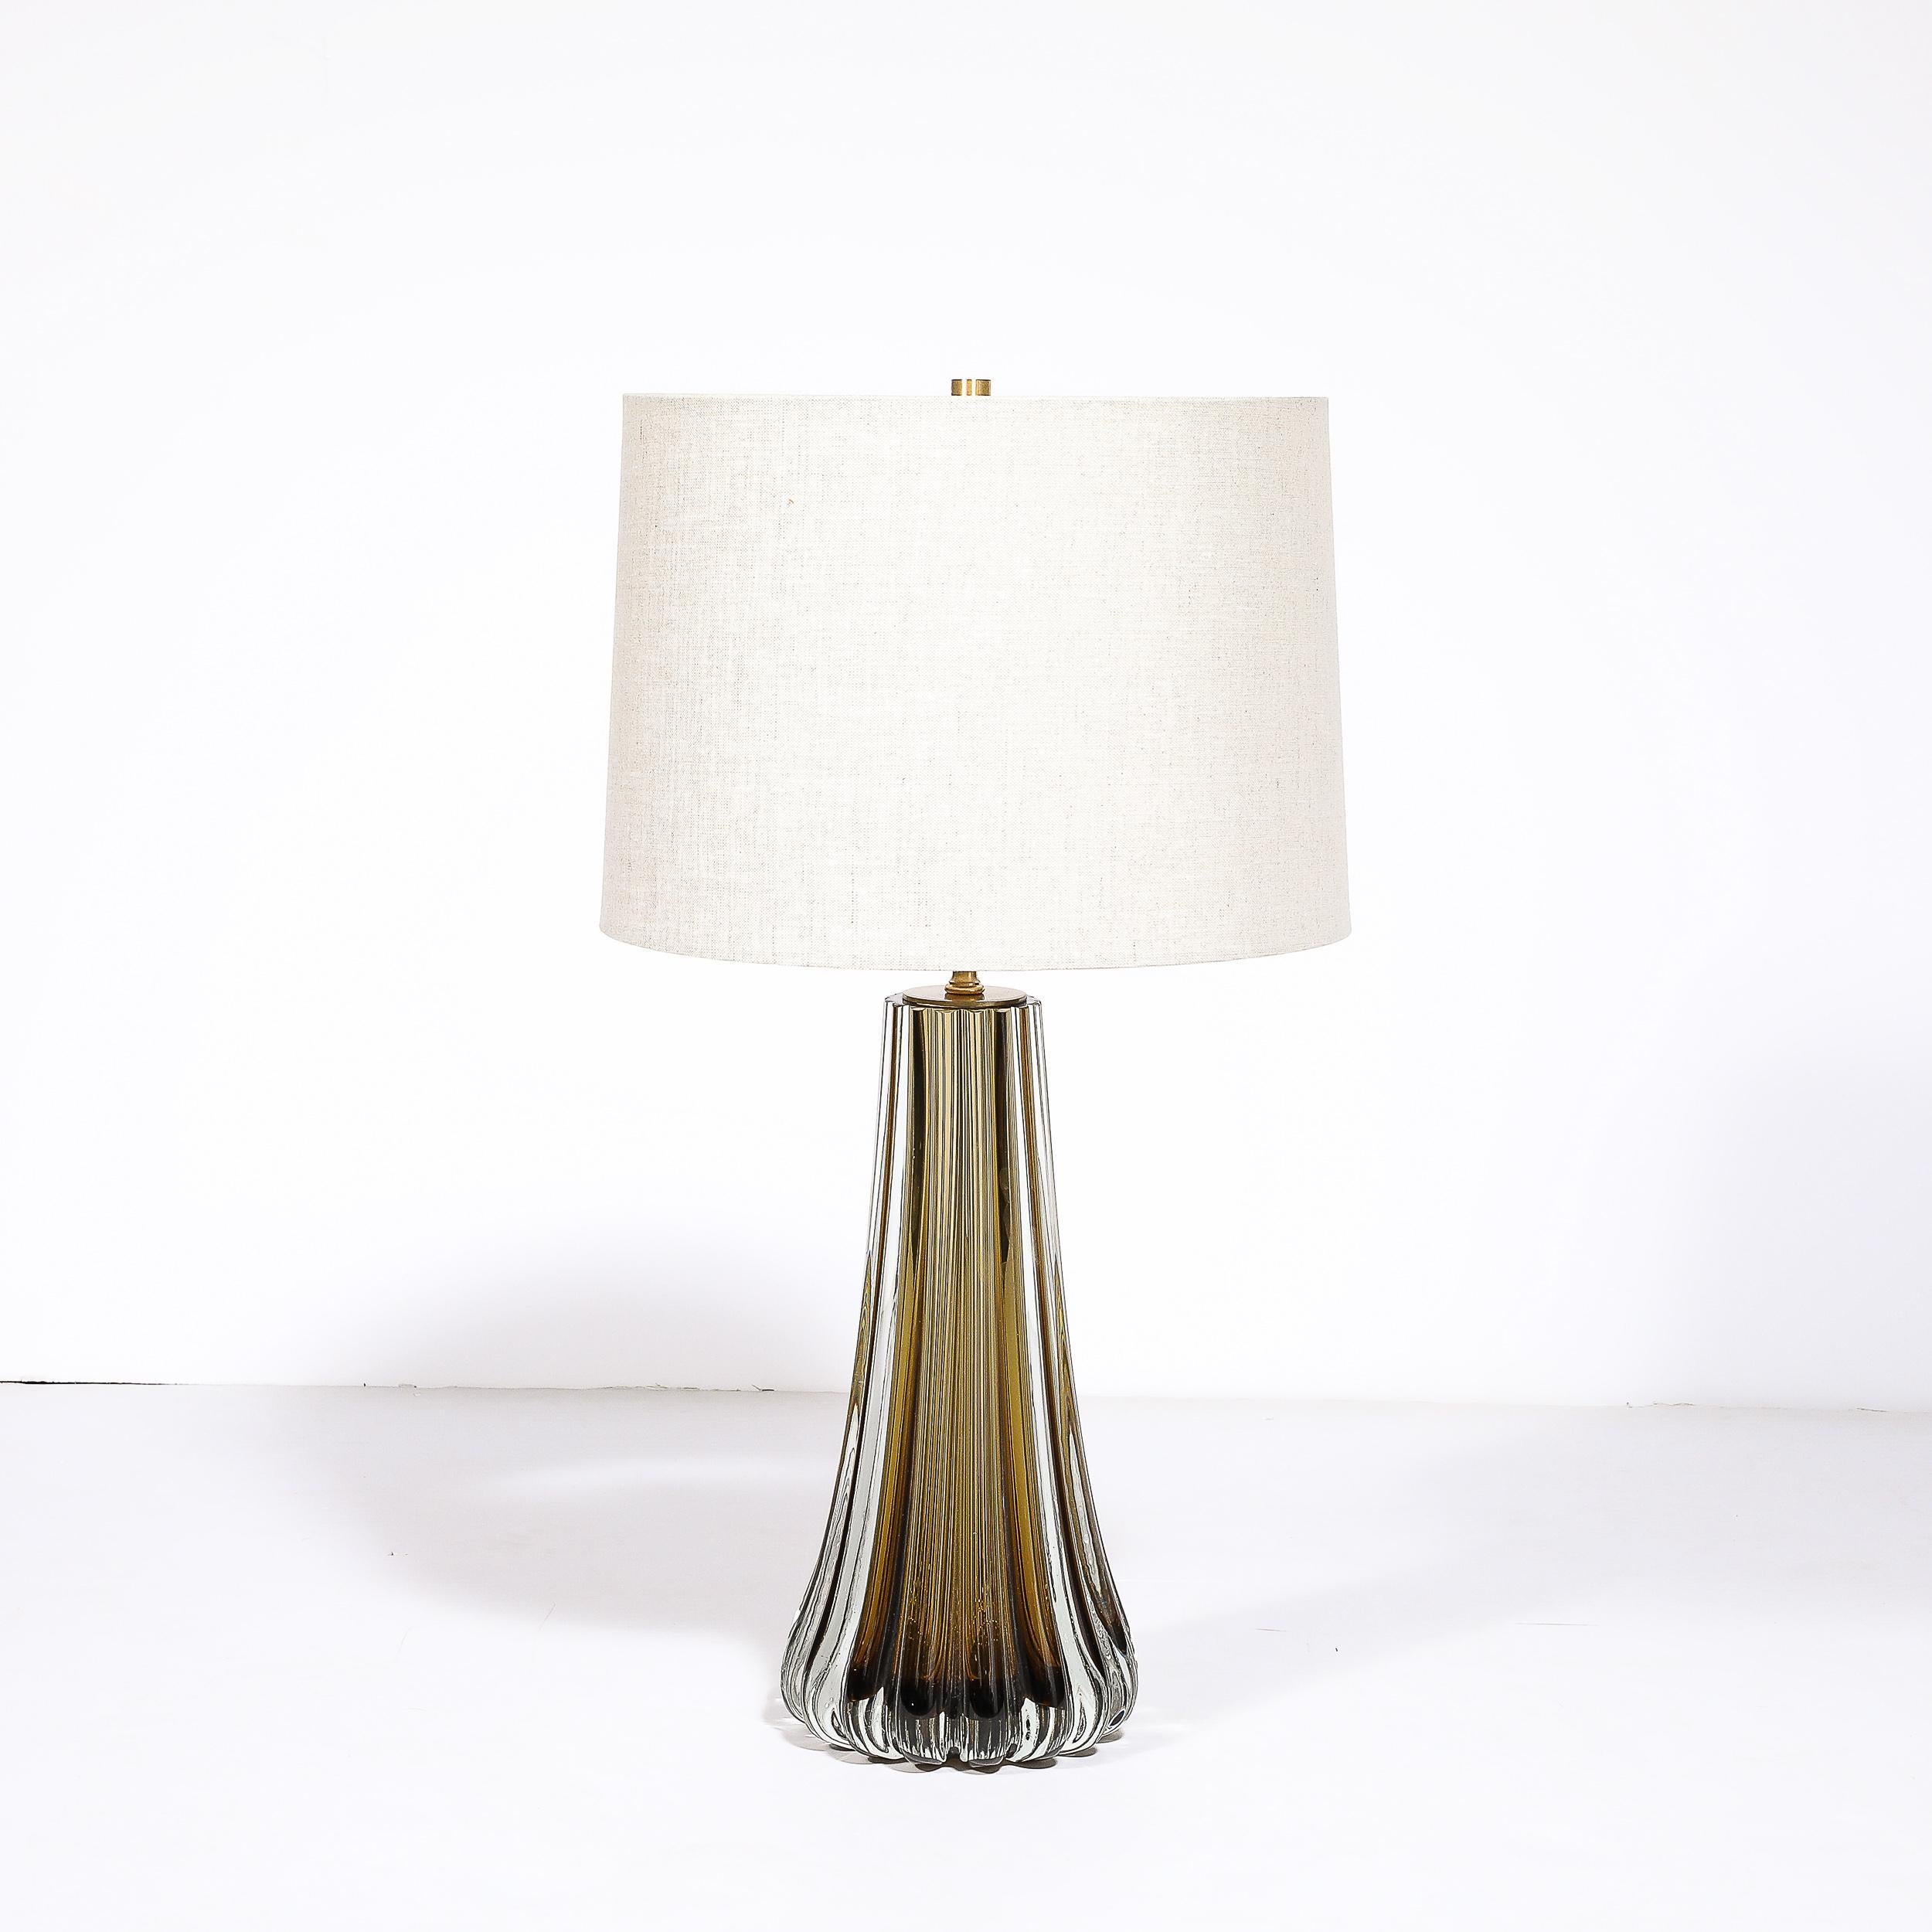 Italian Modernist Hand-Blown Fluted Smoked Topaz Murano Glass & Brass Table Lamps For Sale